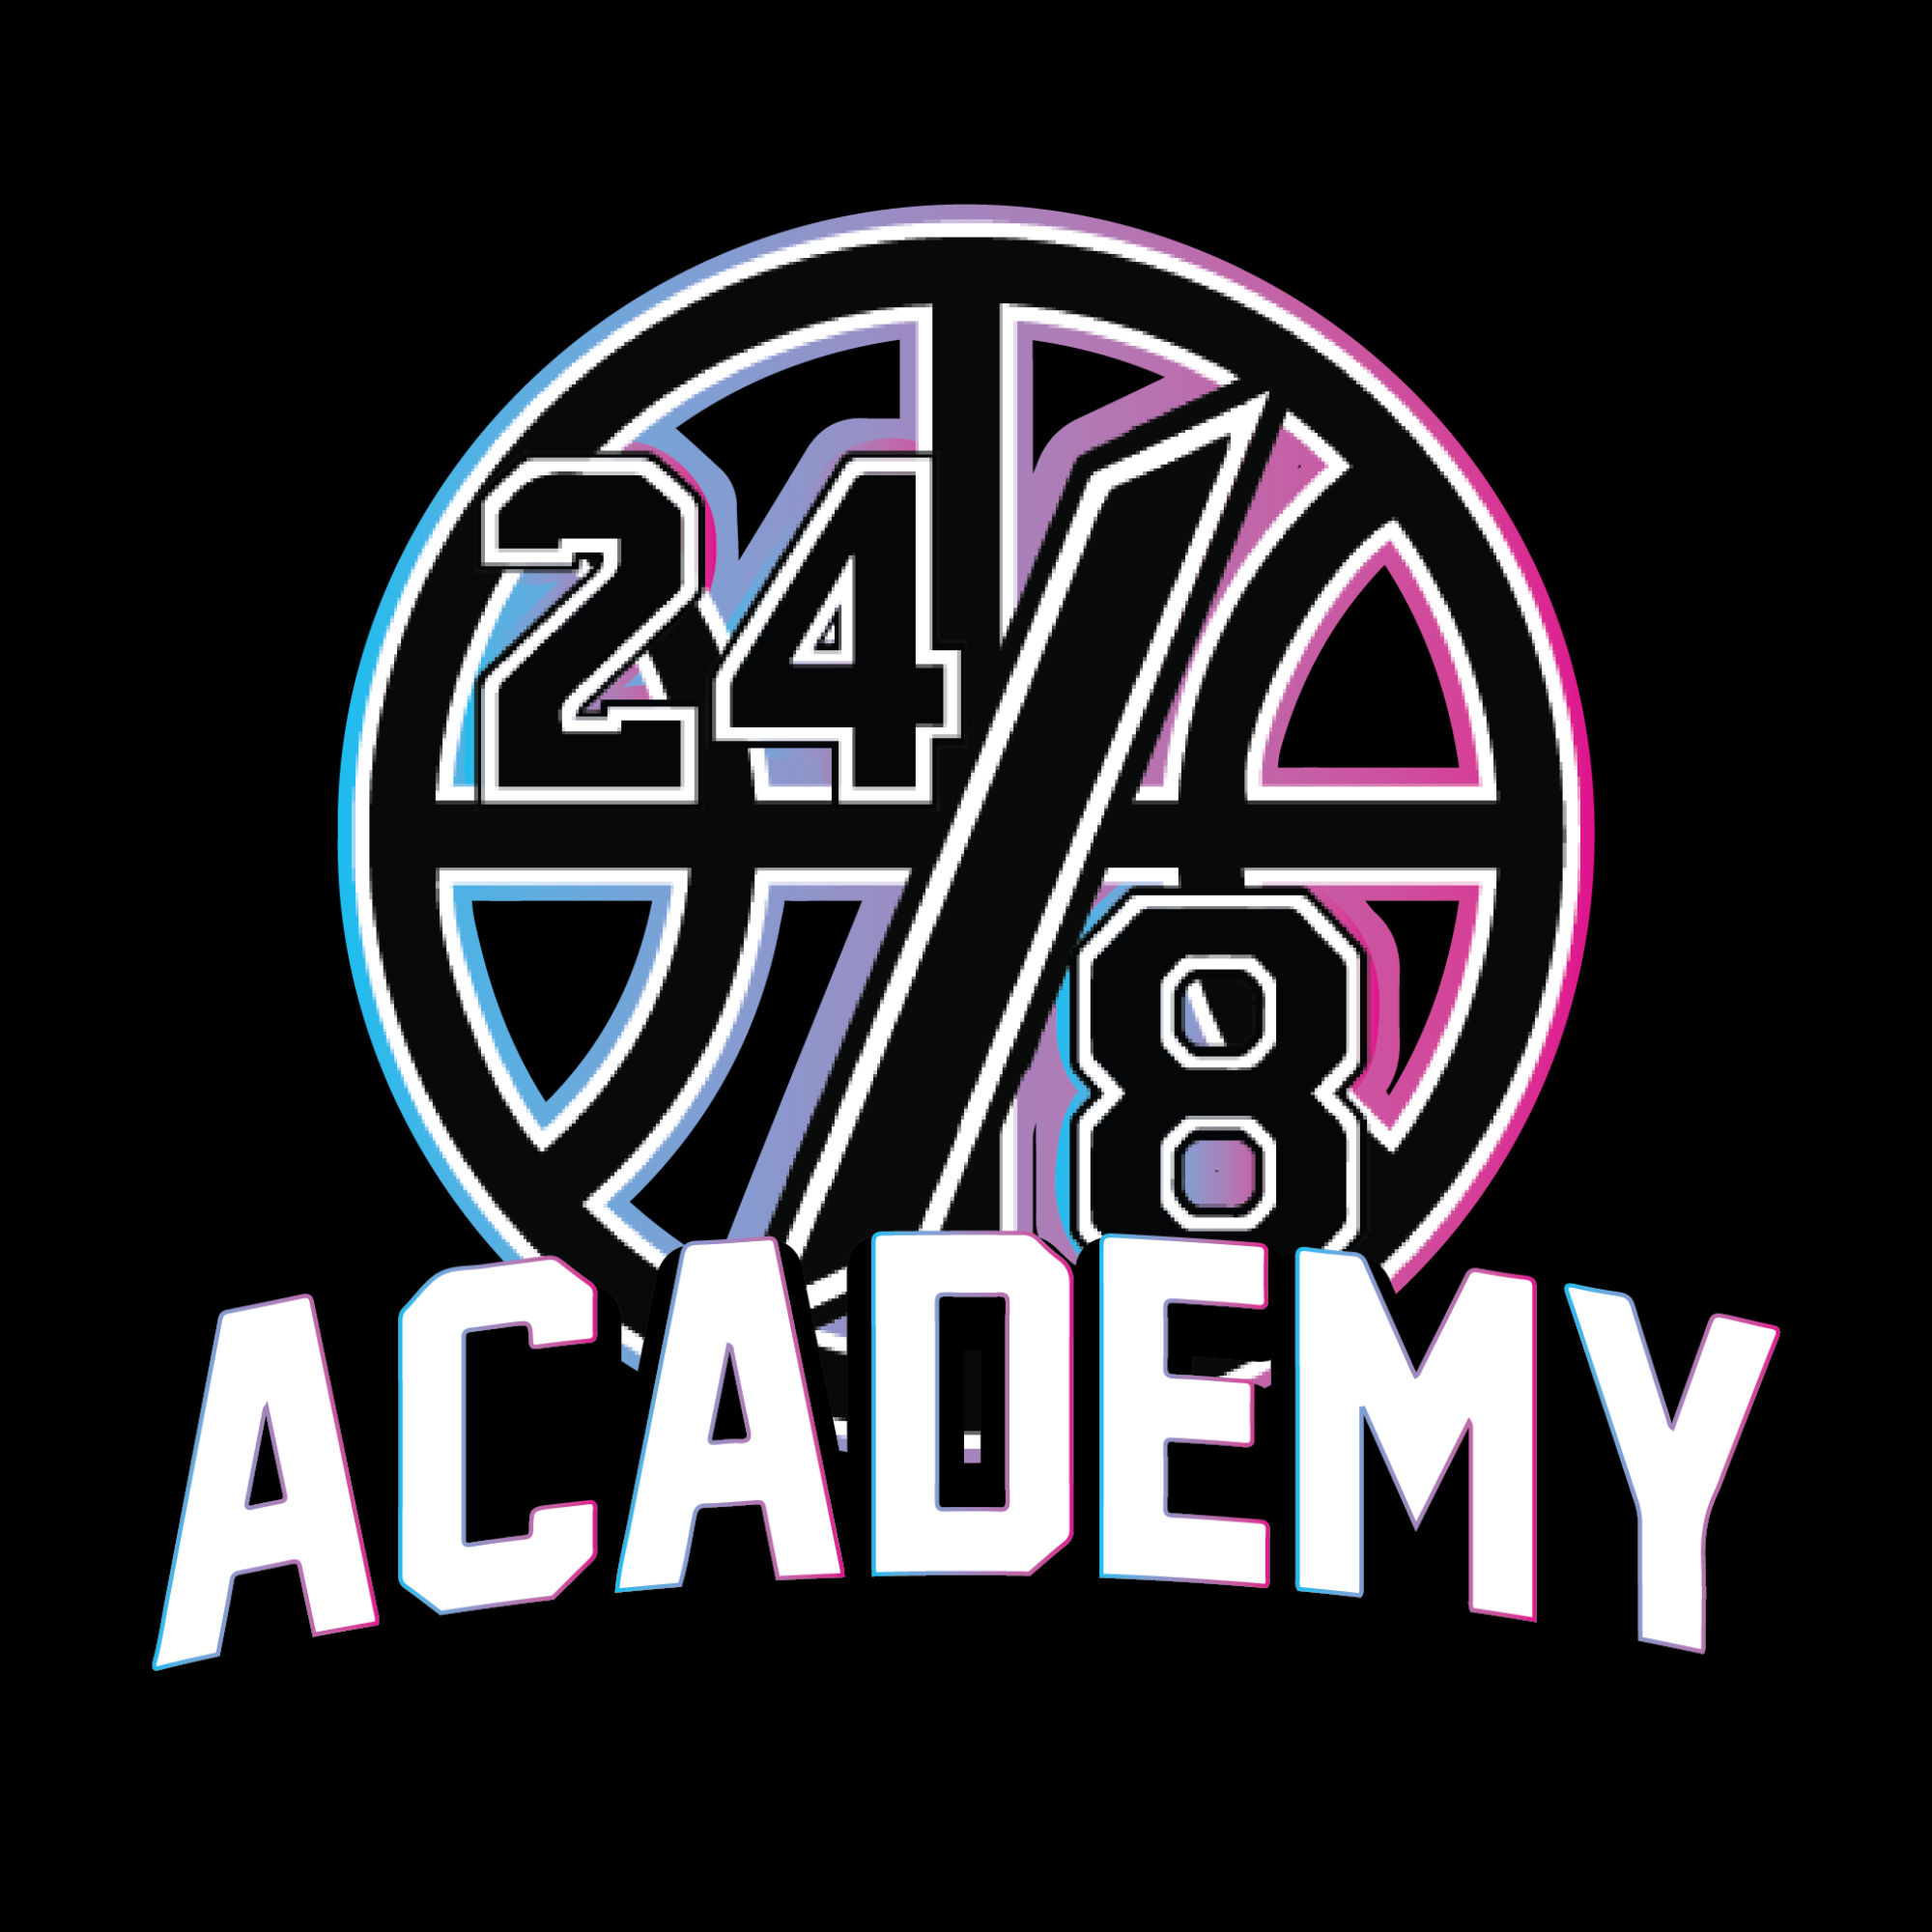 The official logo of 24/8 Academy